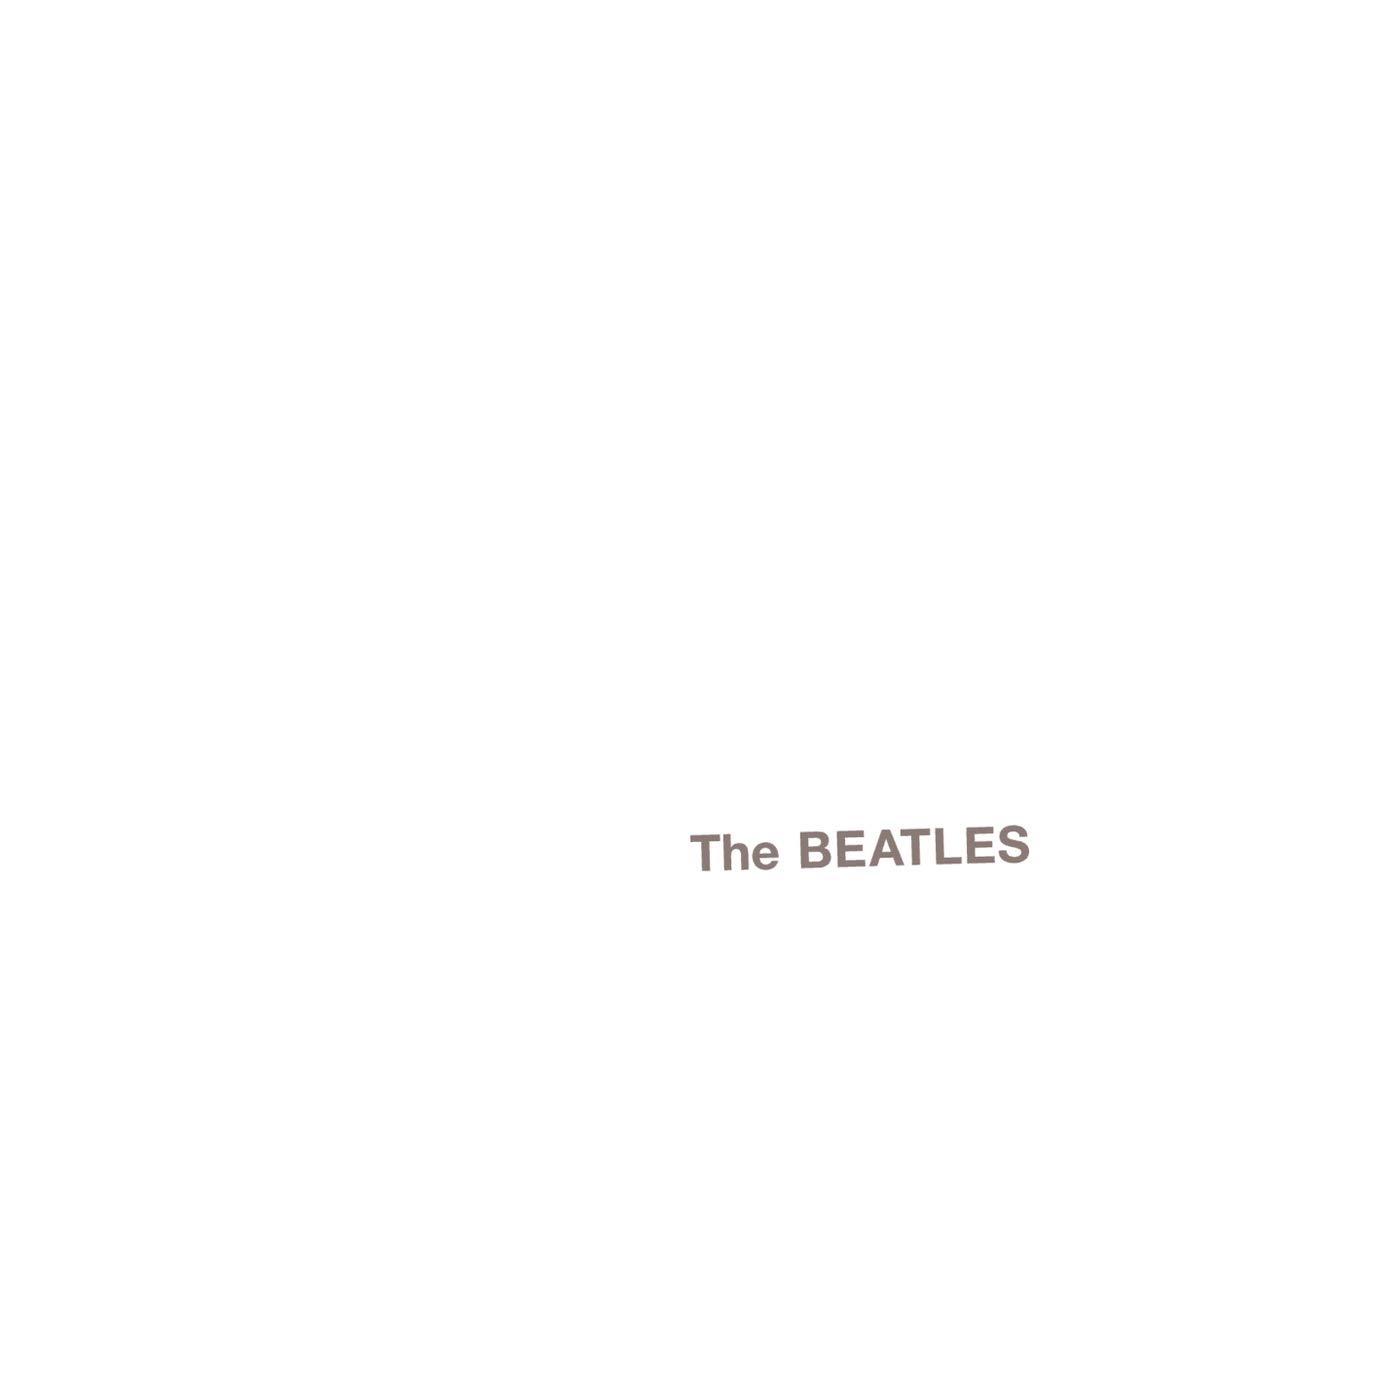 The Beatles-The Beatles-(0094638246619)-REISSUE REMASTERED-2LP-FLAC-2017-WRE